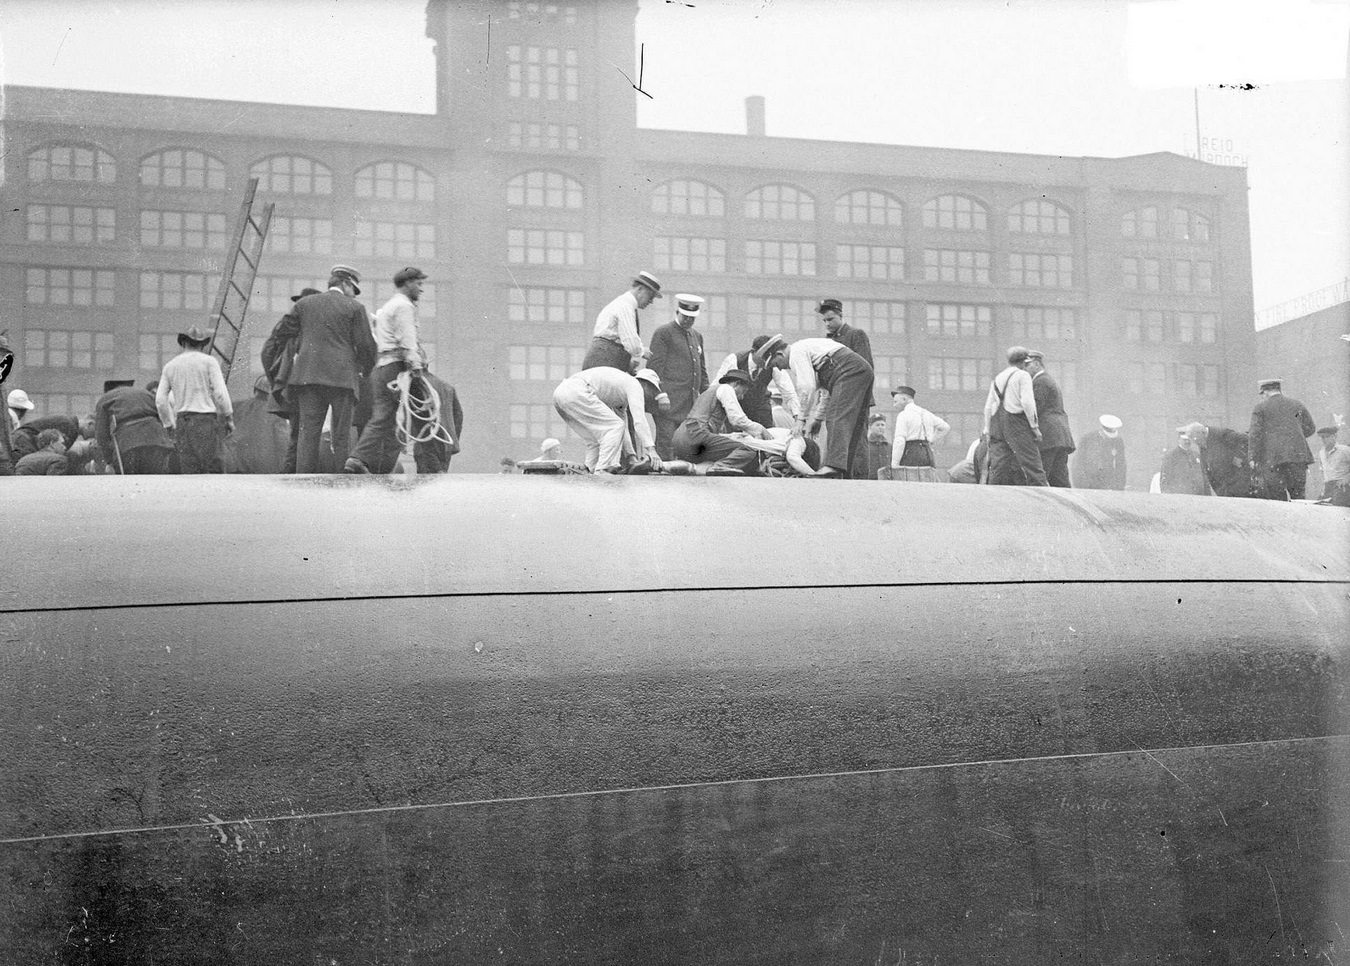 Rescuers and survivors atop the hull of the overturned Eastland steamer in the Chicago River, Chicago, Illinois, circa July 24, 1915.